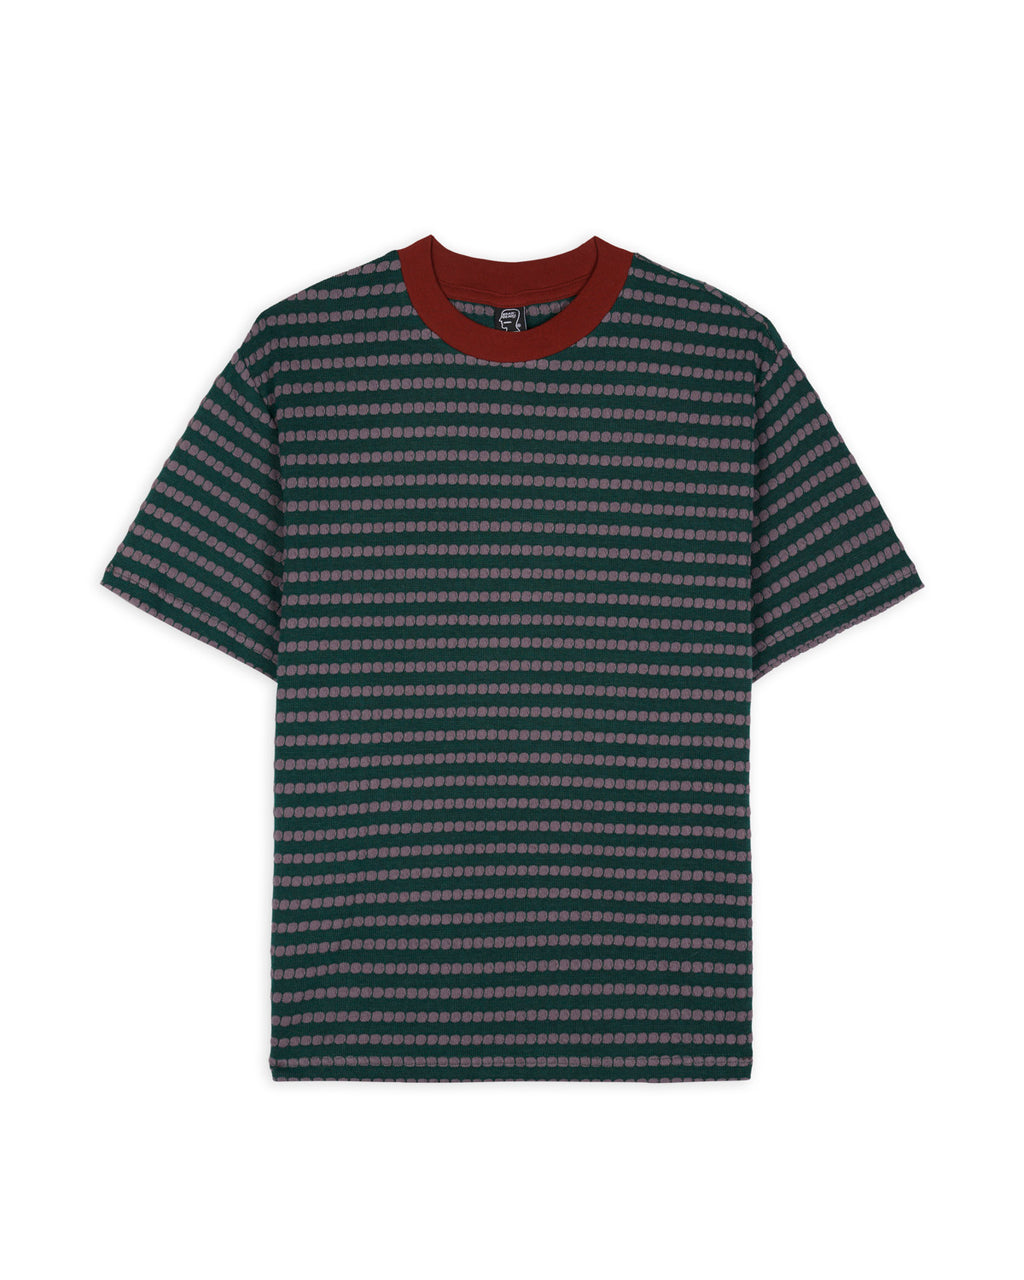 Raised Dot Striped T-shirt - Forest Green 1